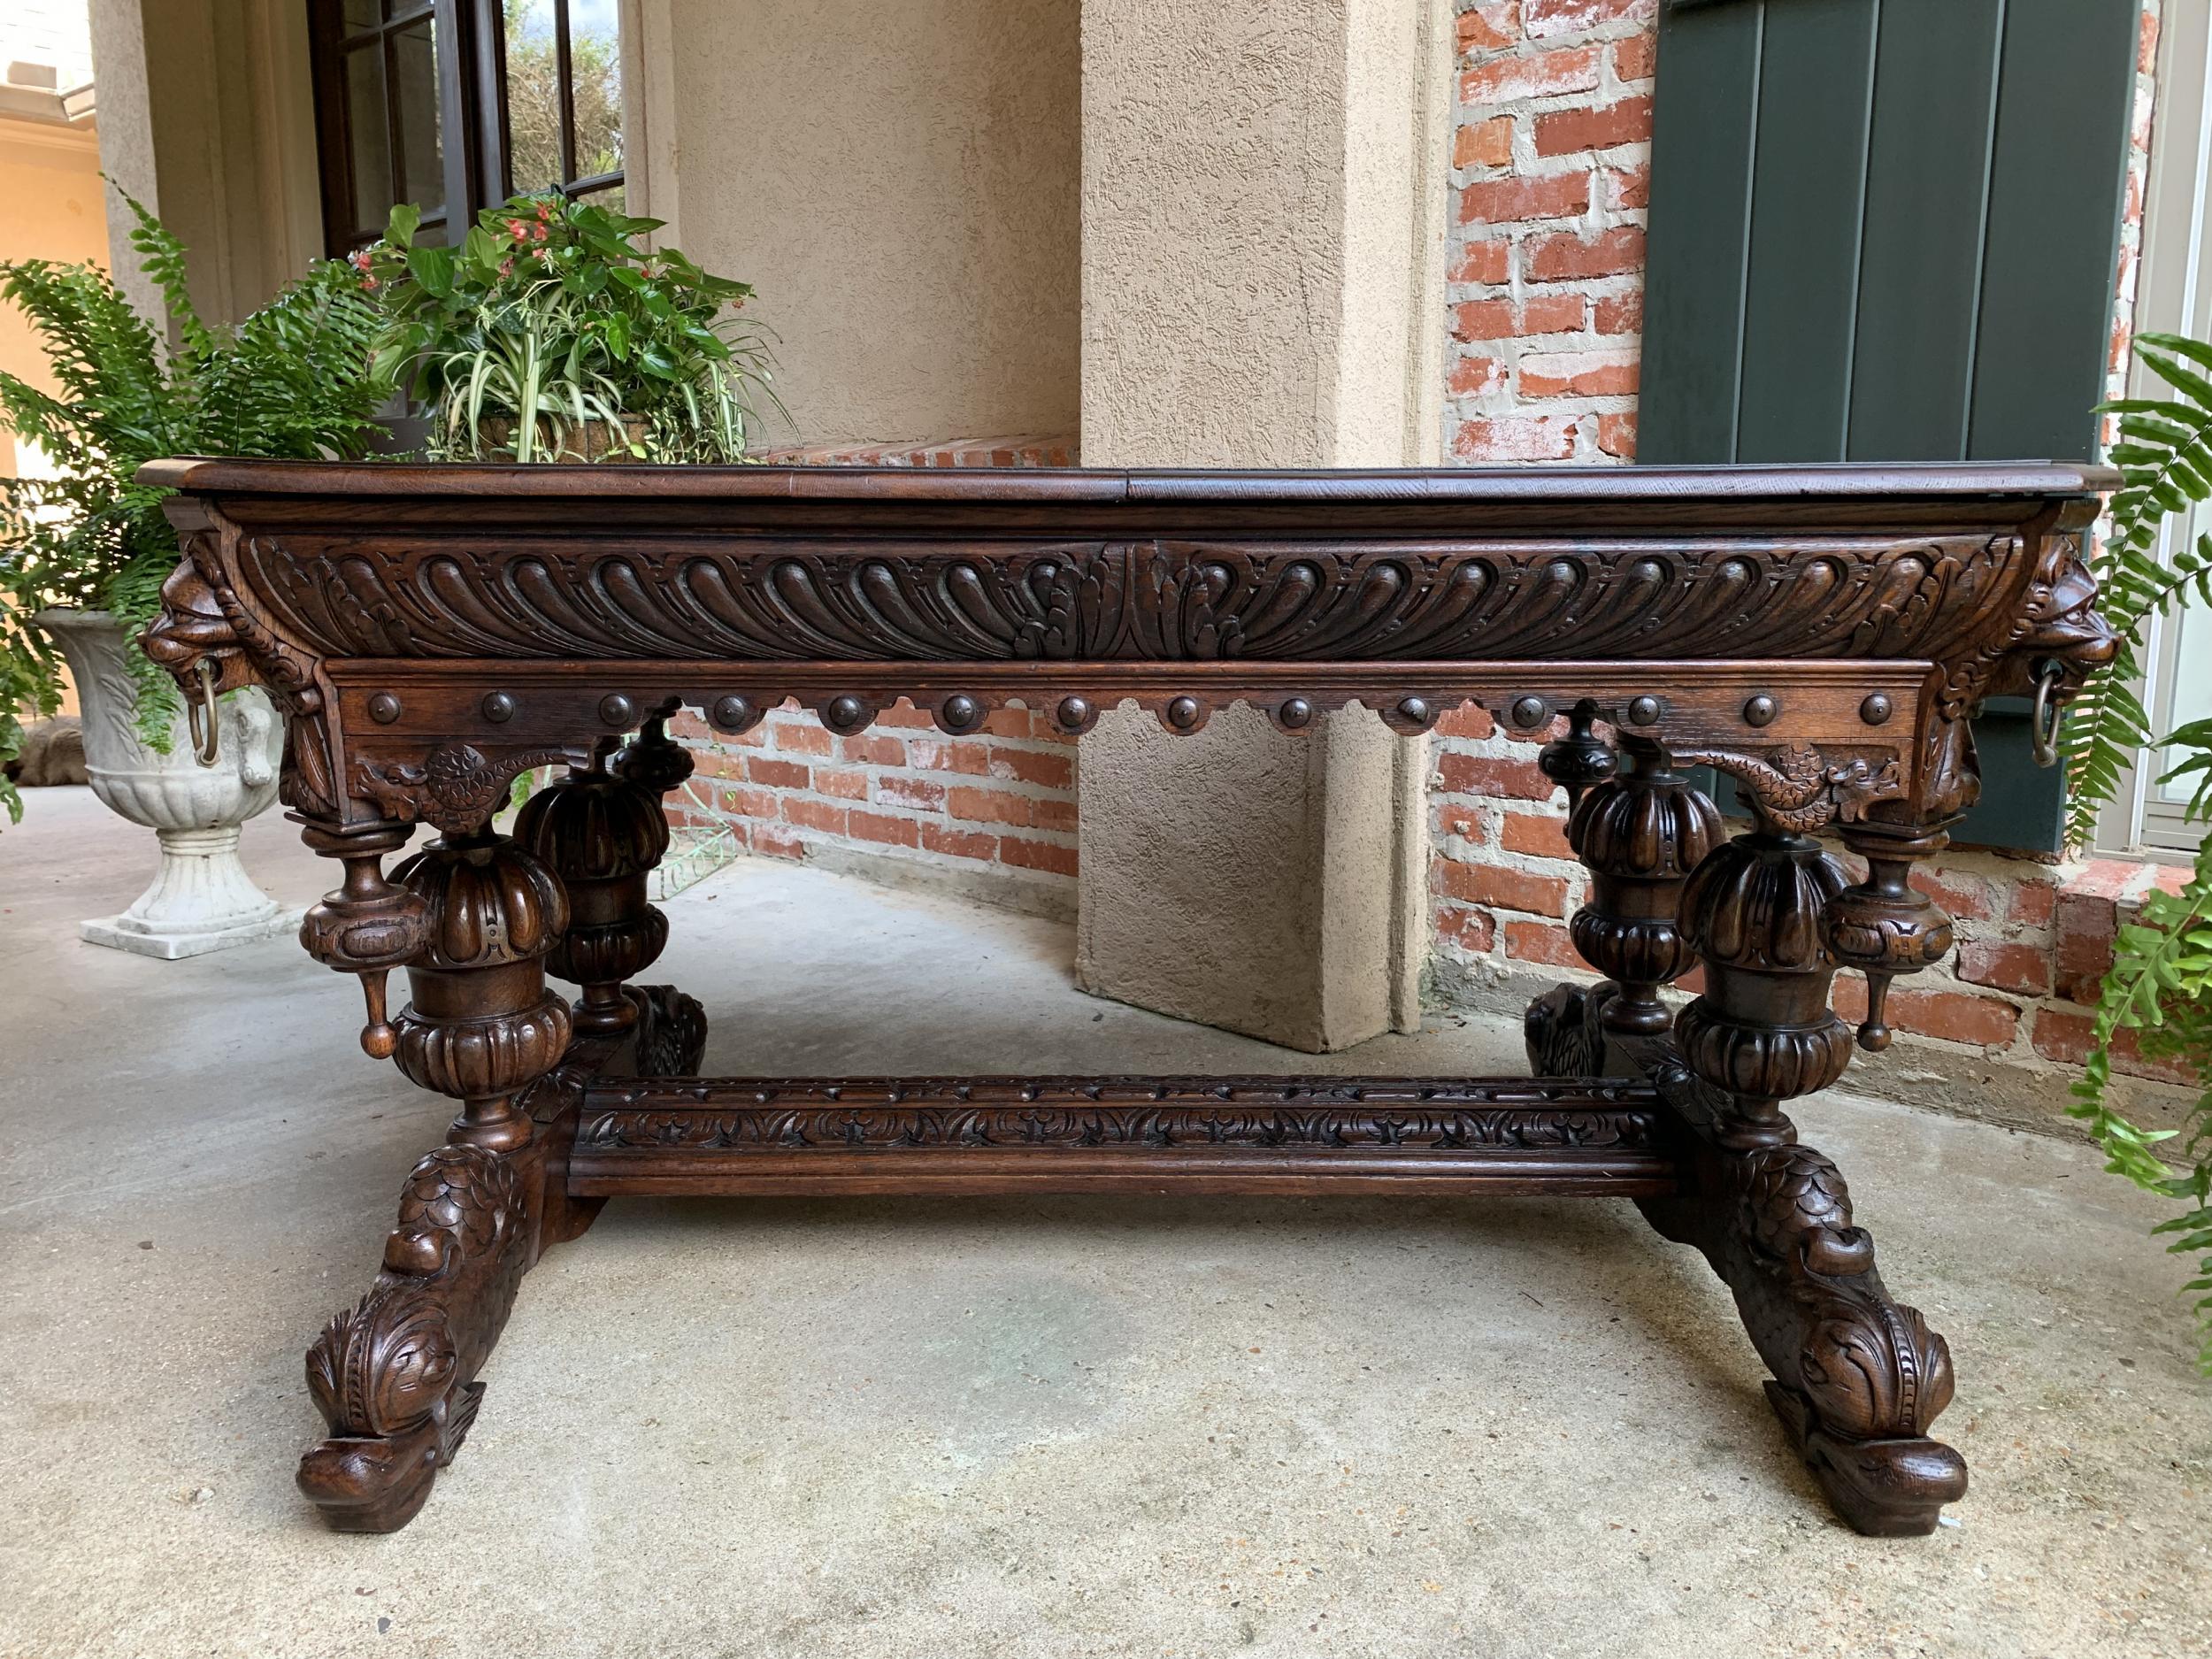 19th century French carved oak dolphin library table desk Renaissance Gothic

~Direct from France~
An elegant antique French carved library table or 